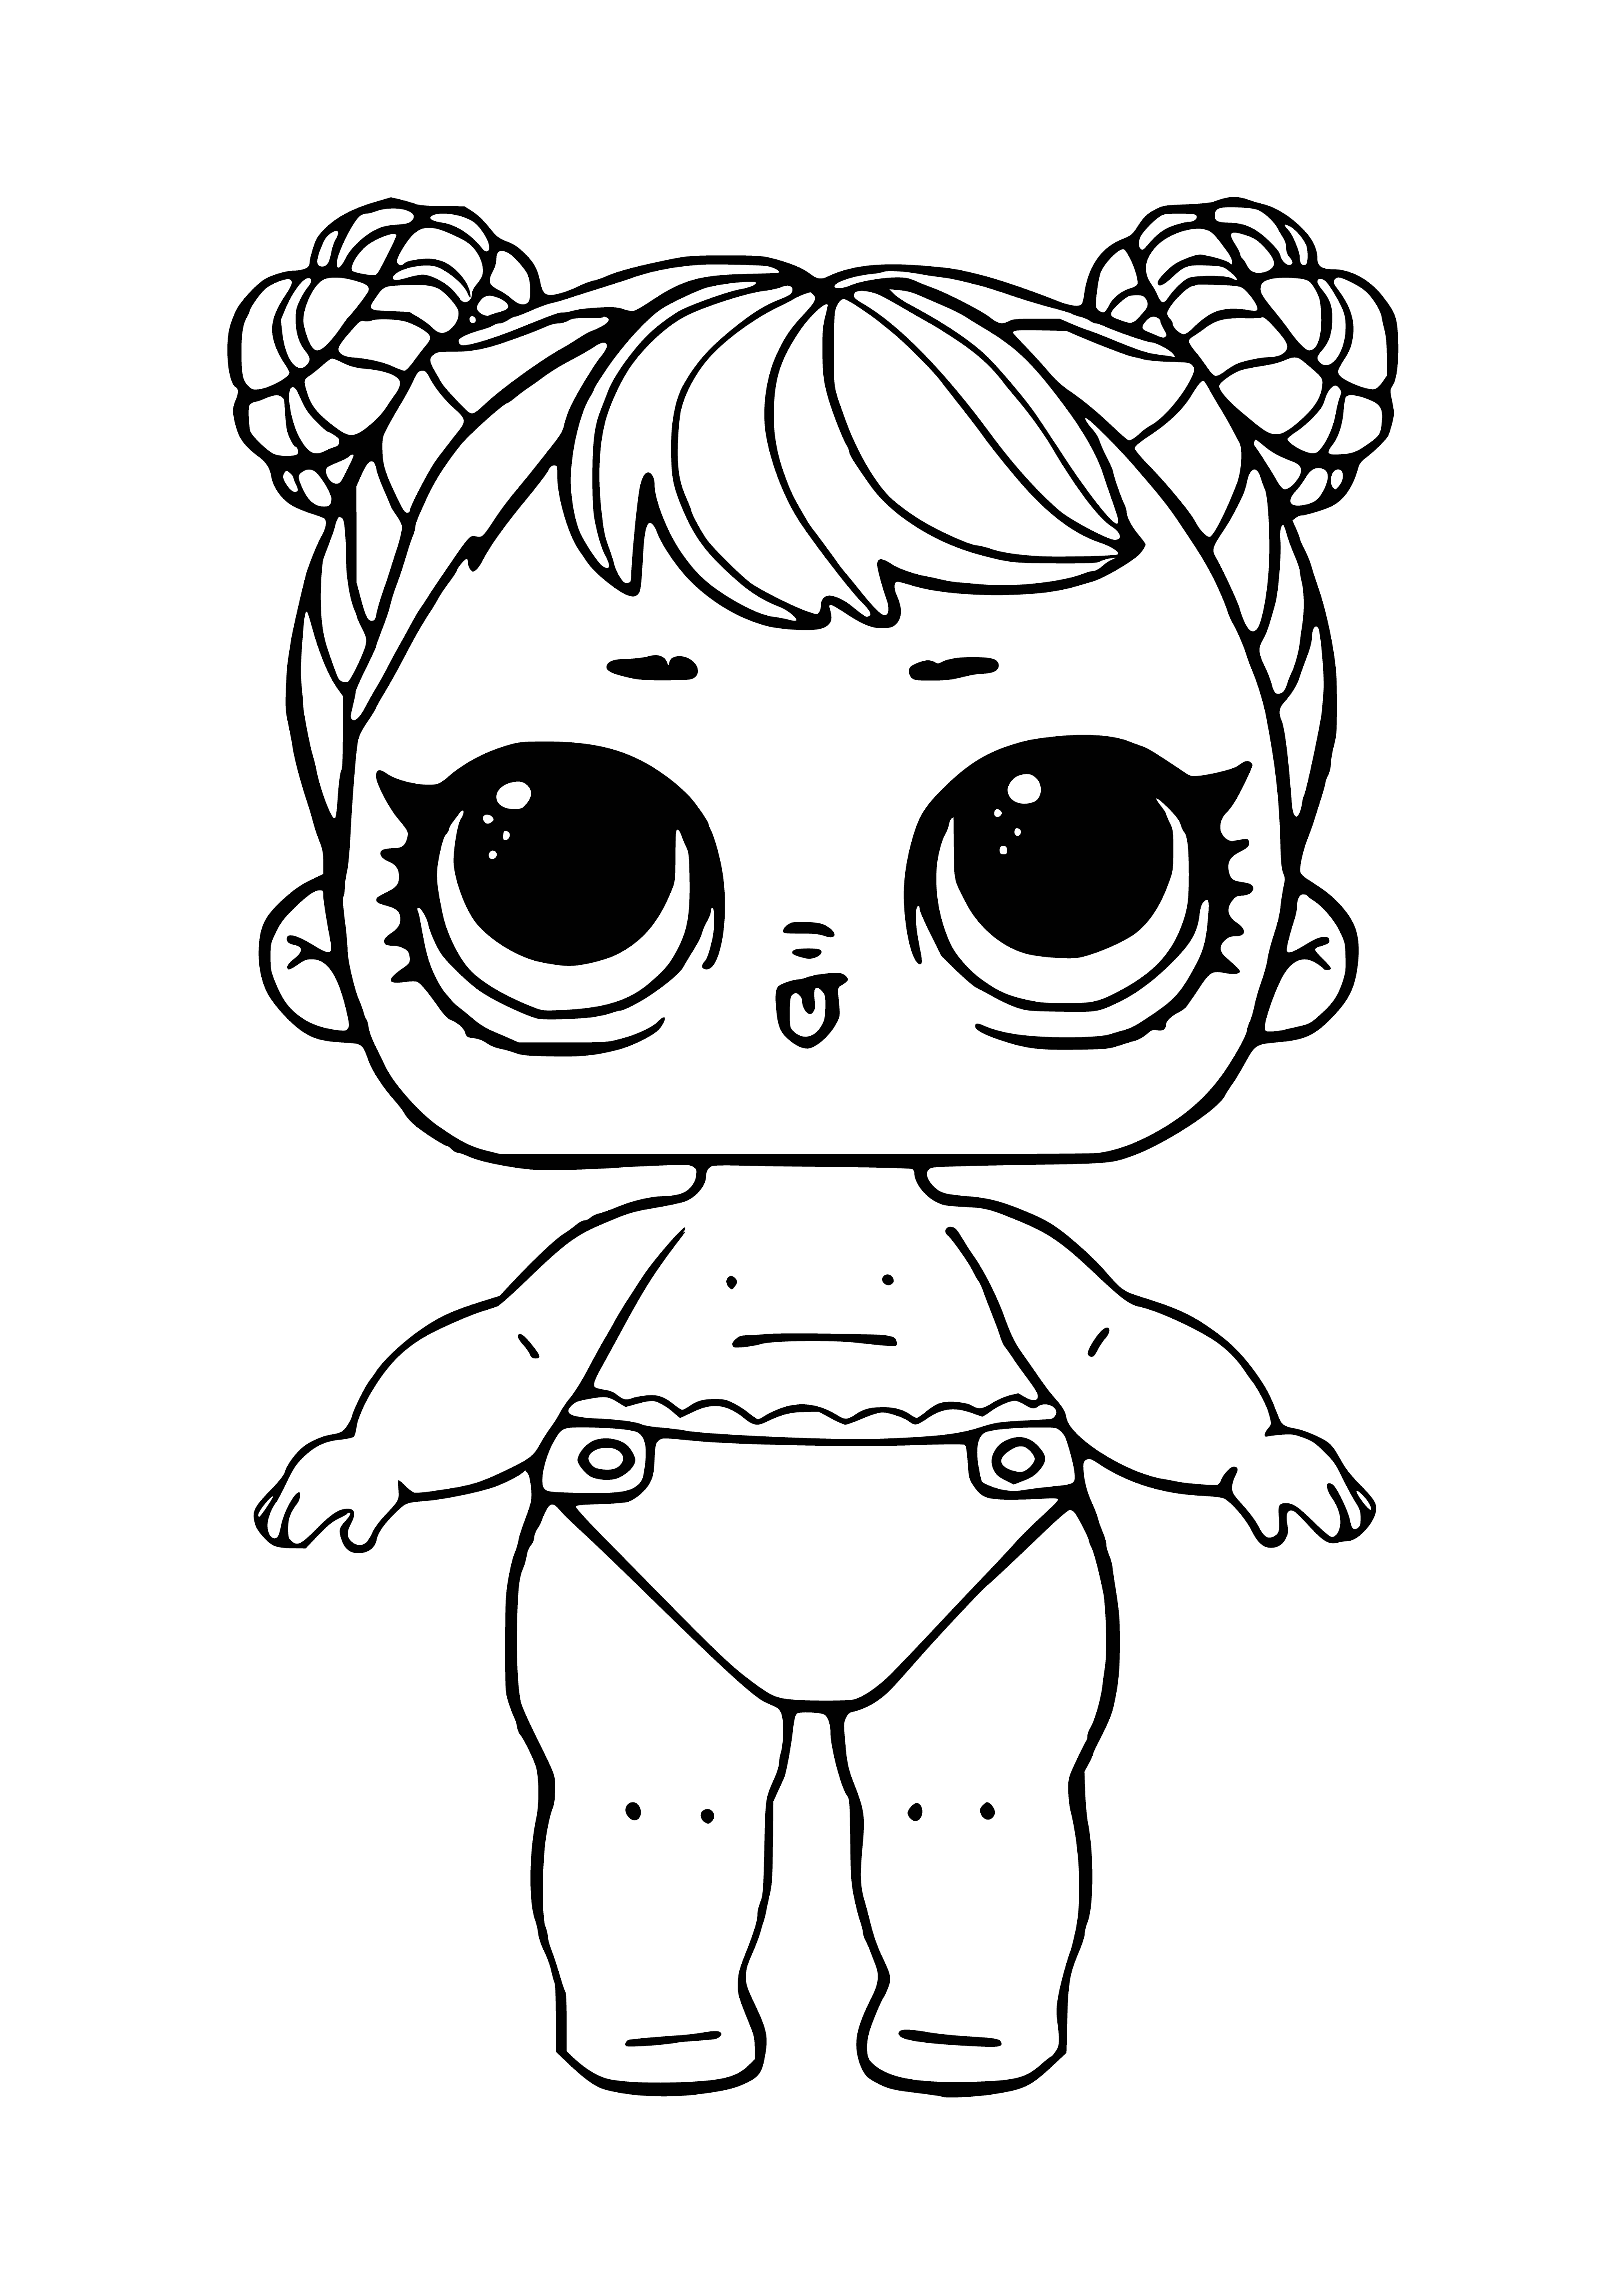 coloring page: A black baby girl laughing, wearing a pink headband with bow & earrings, a white onesie with "LOL" in cursive, hands up & legs crossed.